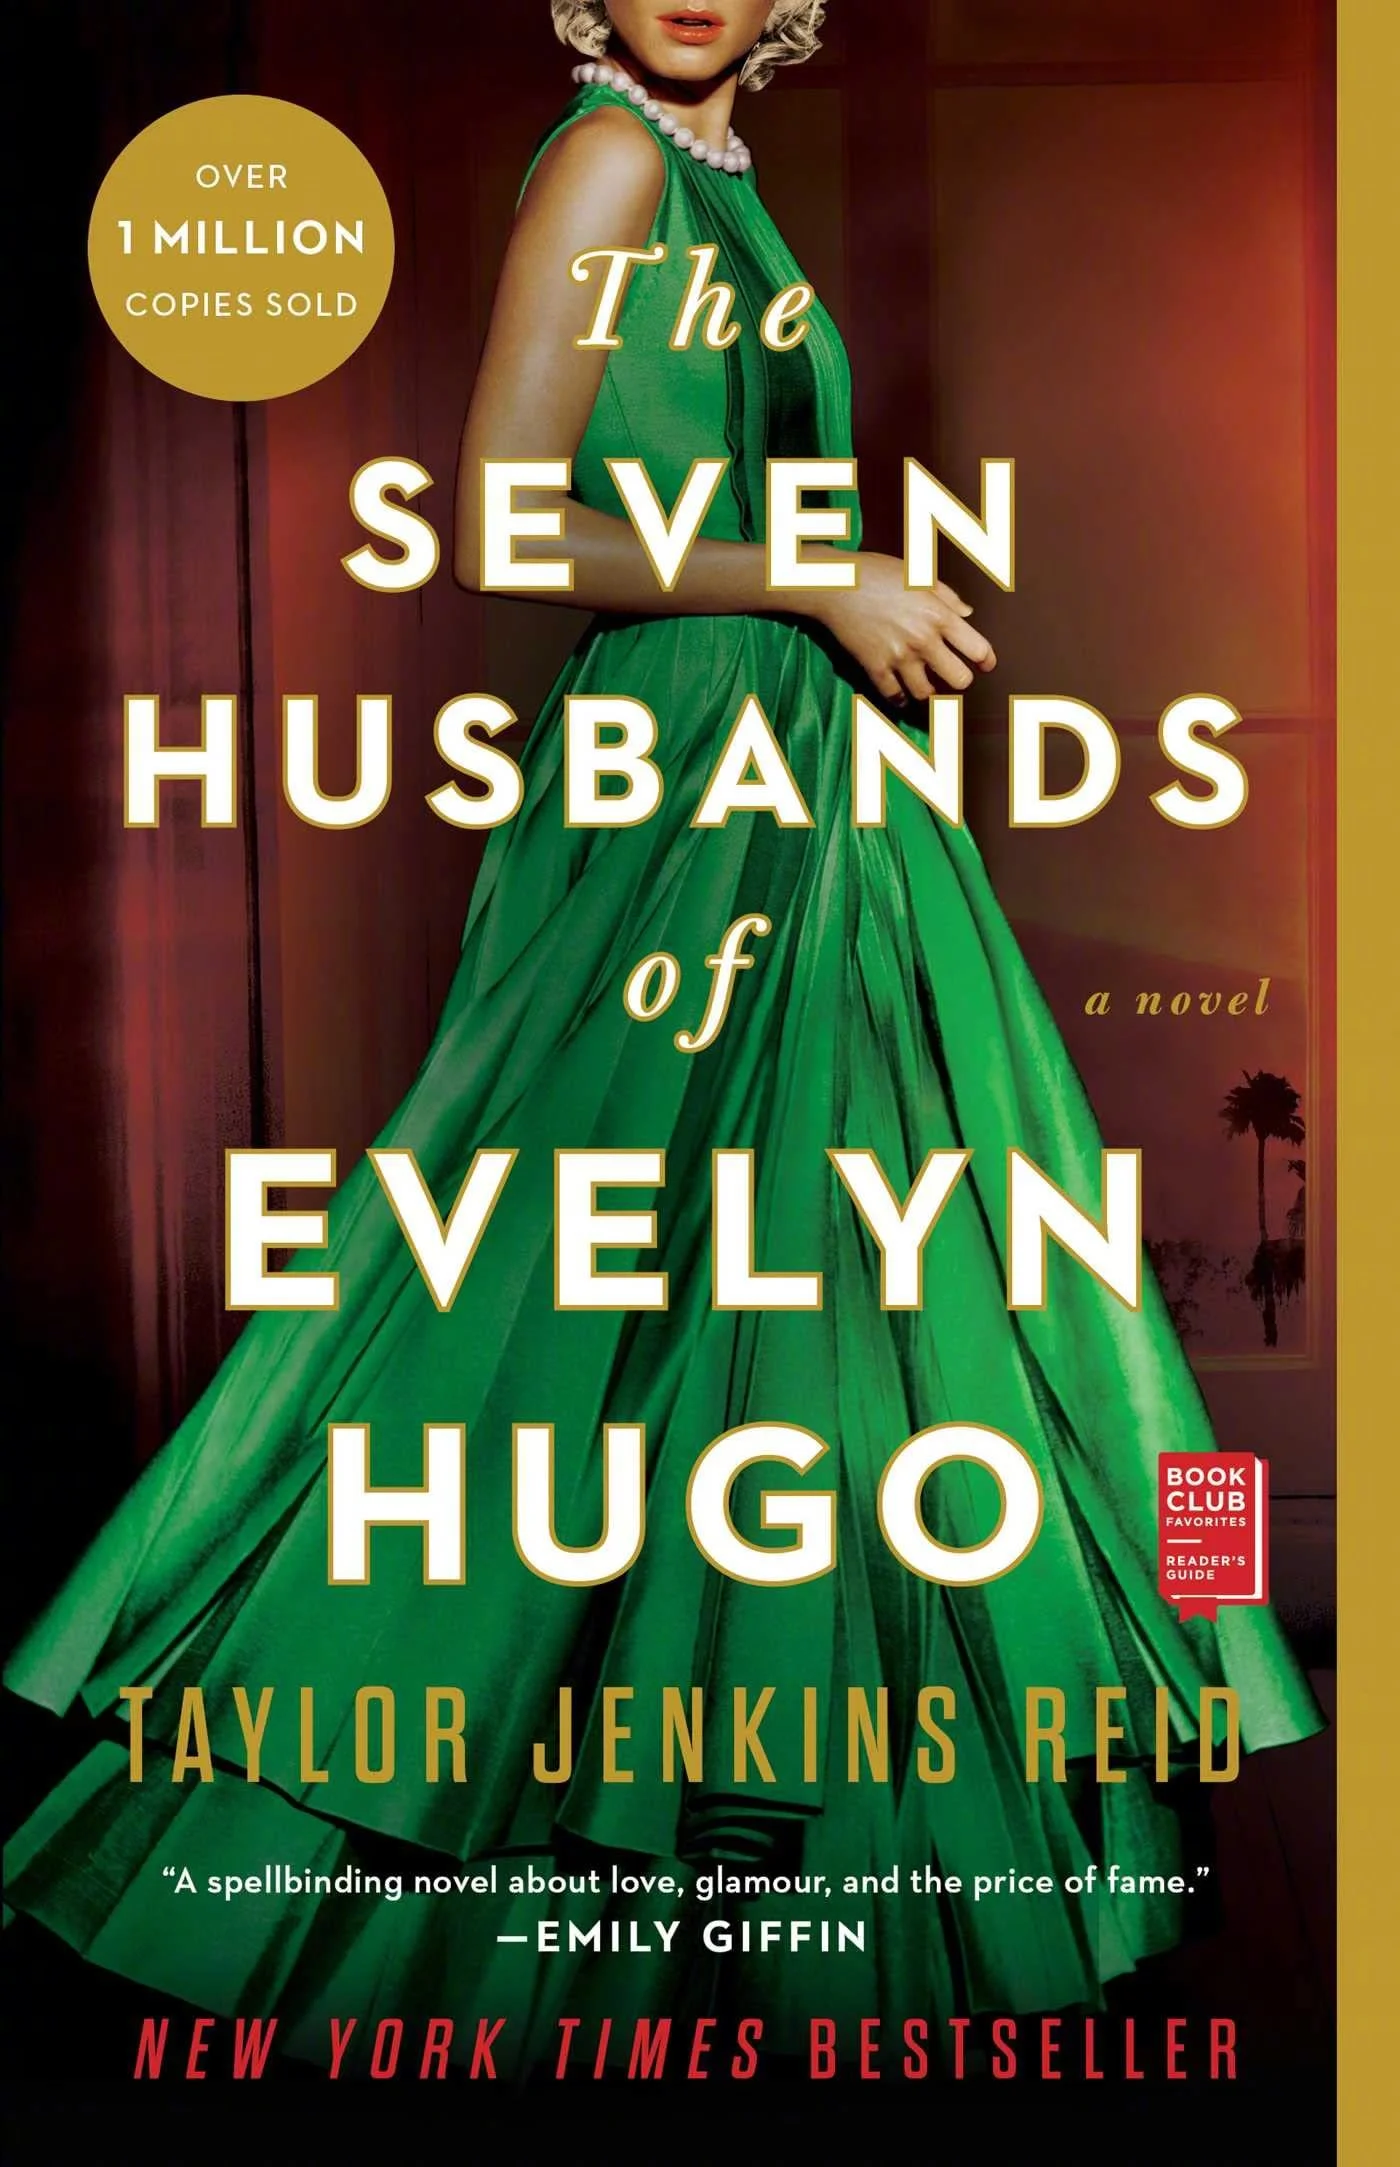 Netflix will make 'The Seven Husbands of Evelyn Hugo' into a movie with Liz Tigelaar as screenwriter